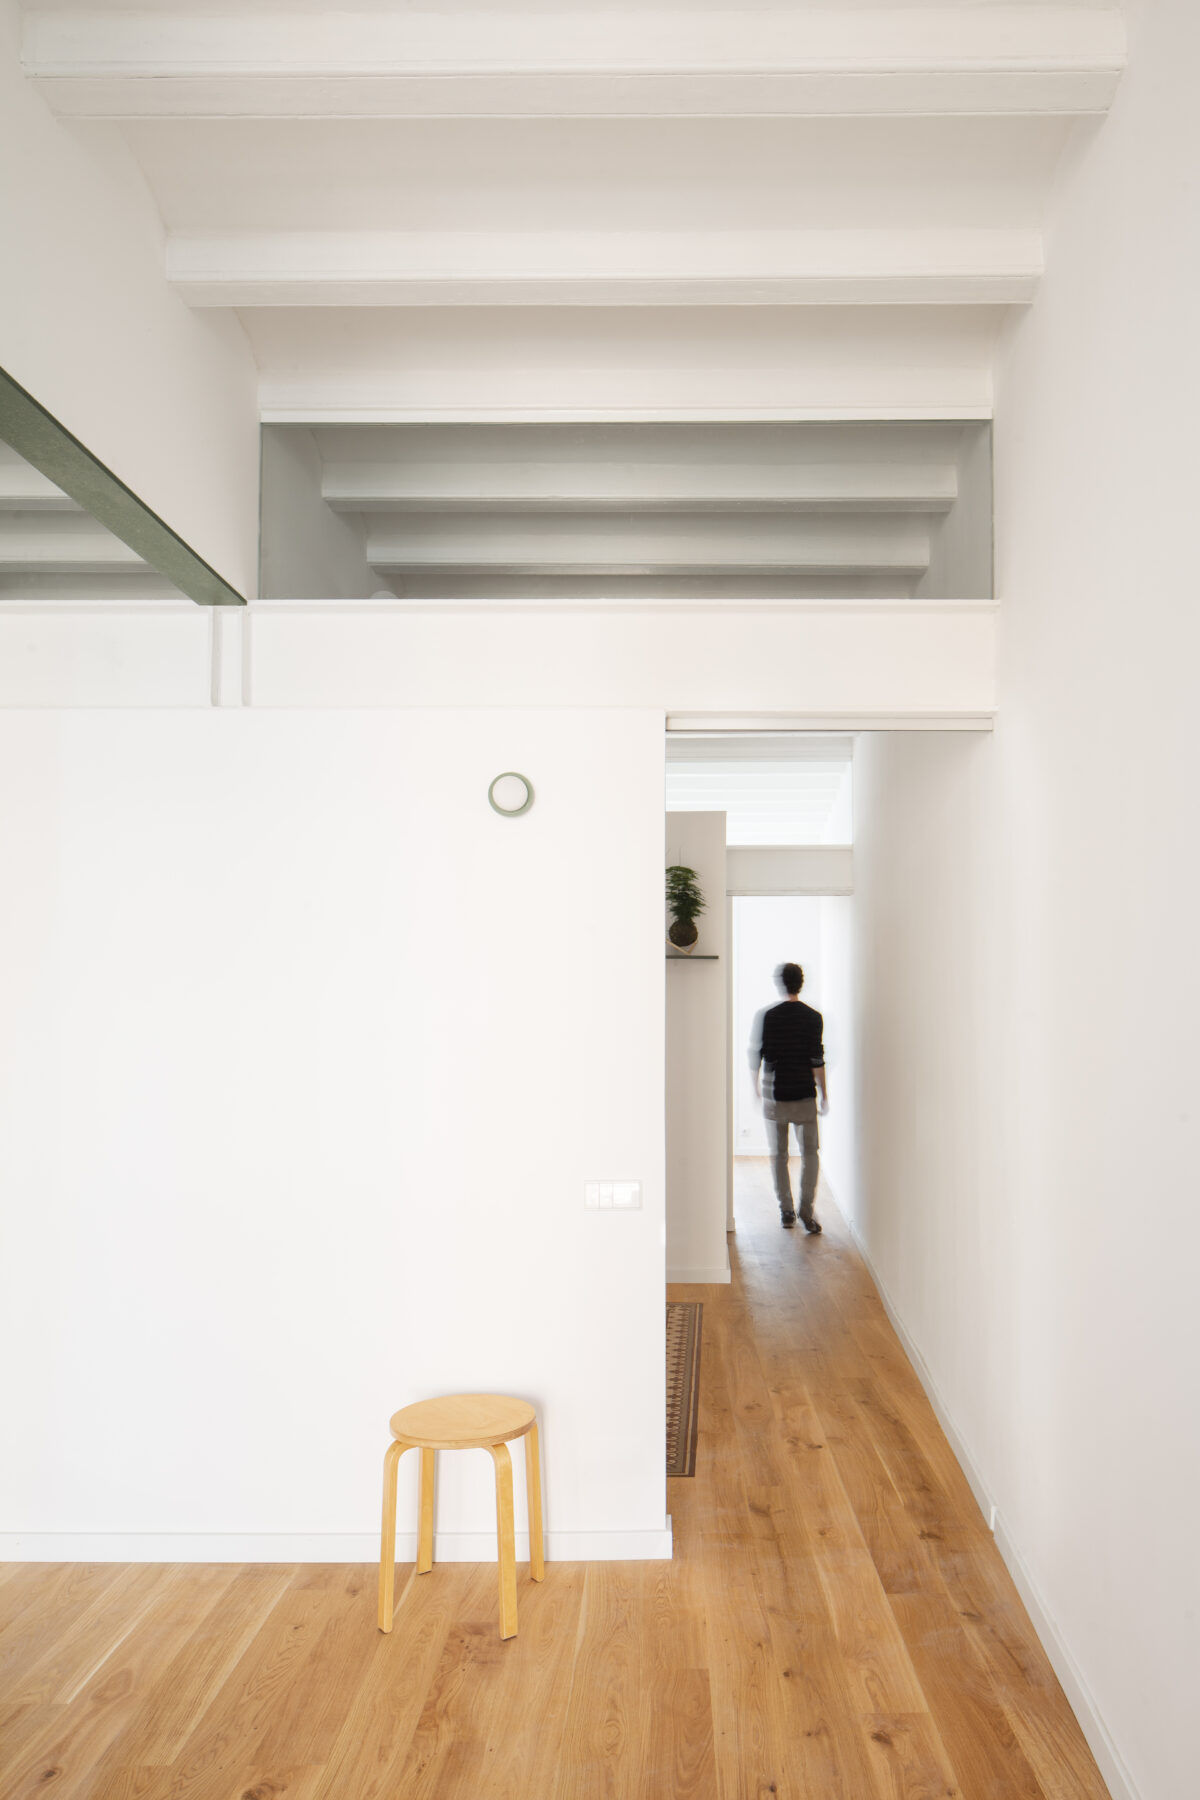 Archisearch Sants - Refurbishment of a dwelling in a century-old residential building in the Sants district, in Barcelona by midori arquitectura